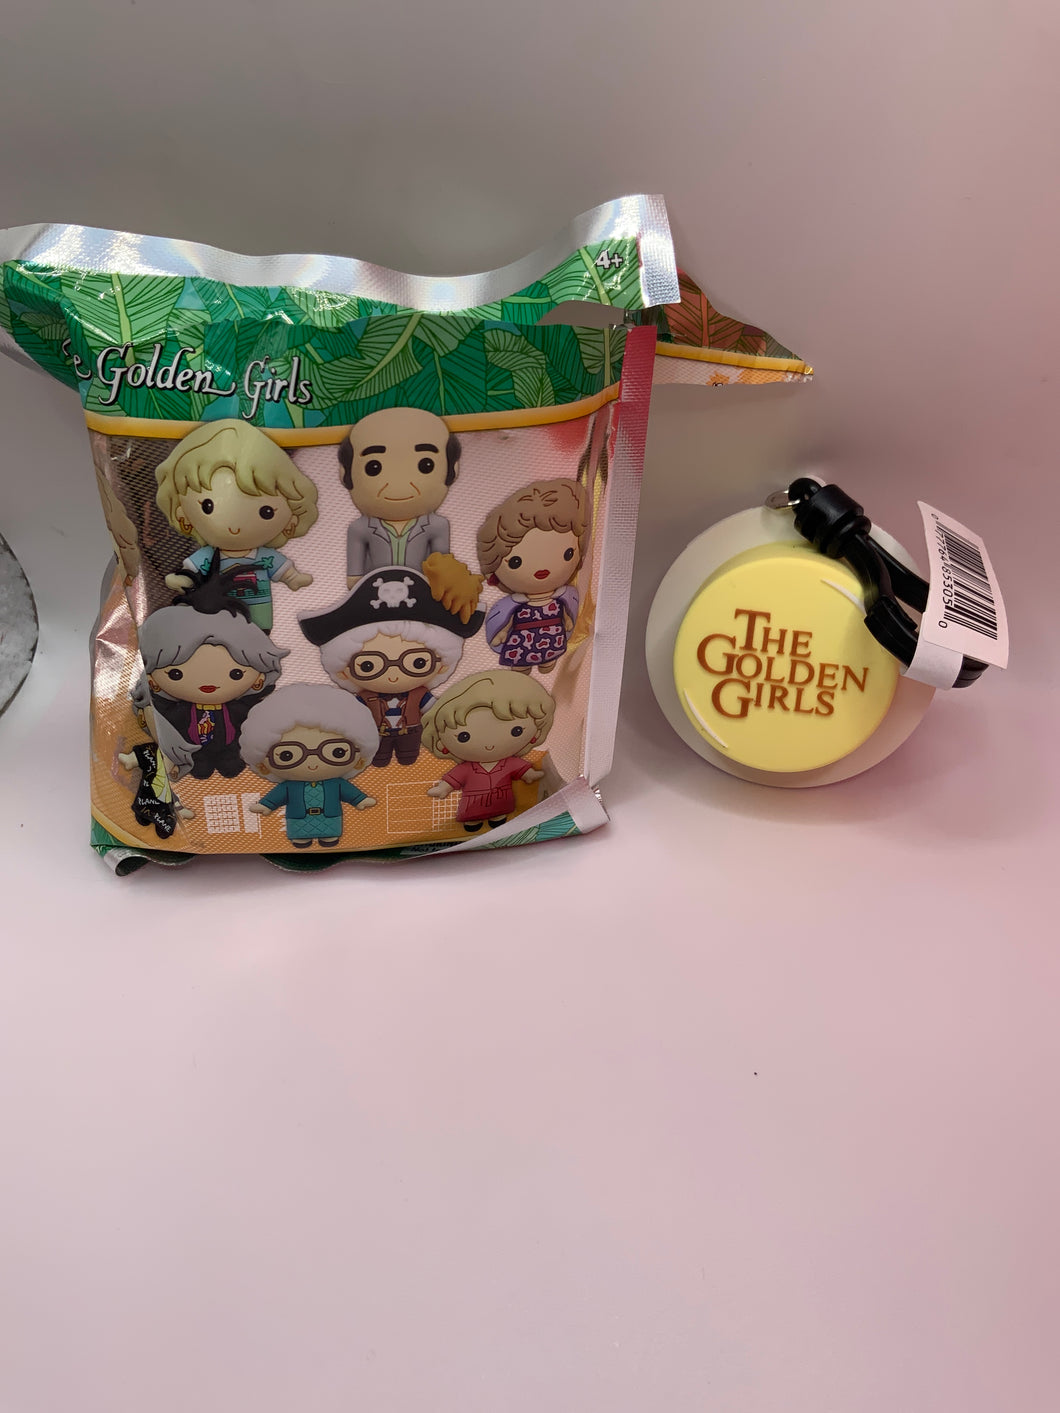 Monogram The Golden Girls Exclusive A Chase Cake Figural Bag Clip Keychain Opened Bag